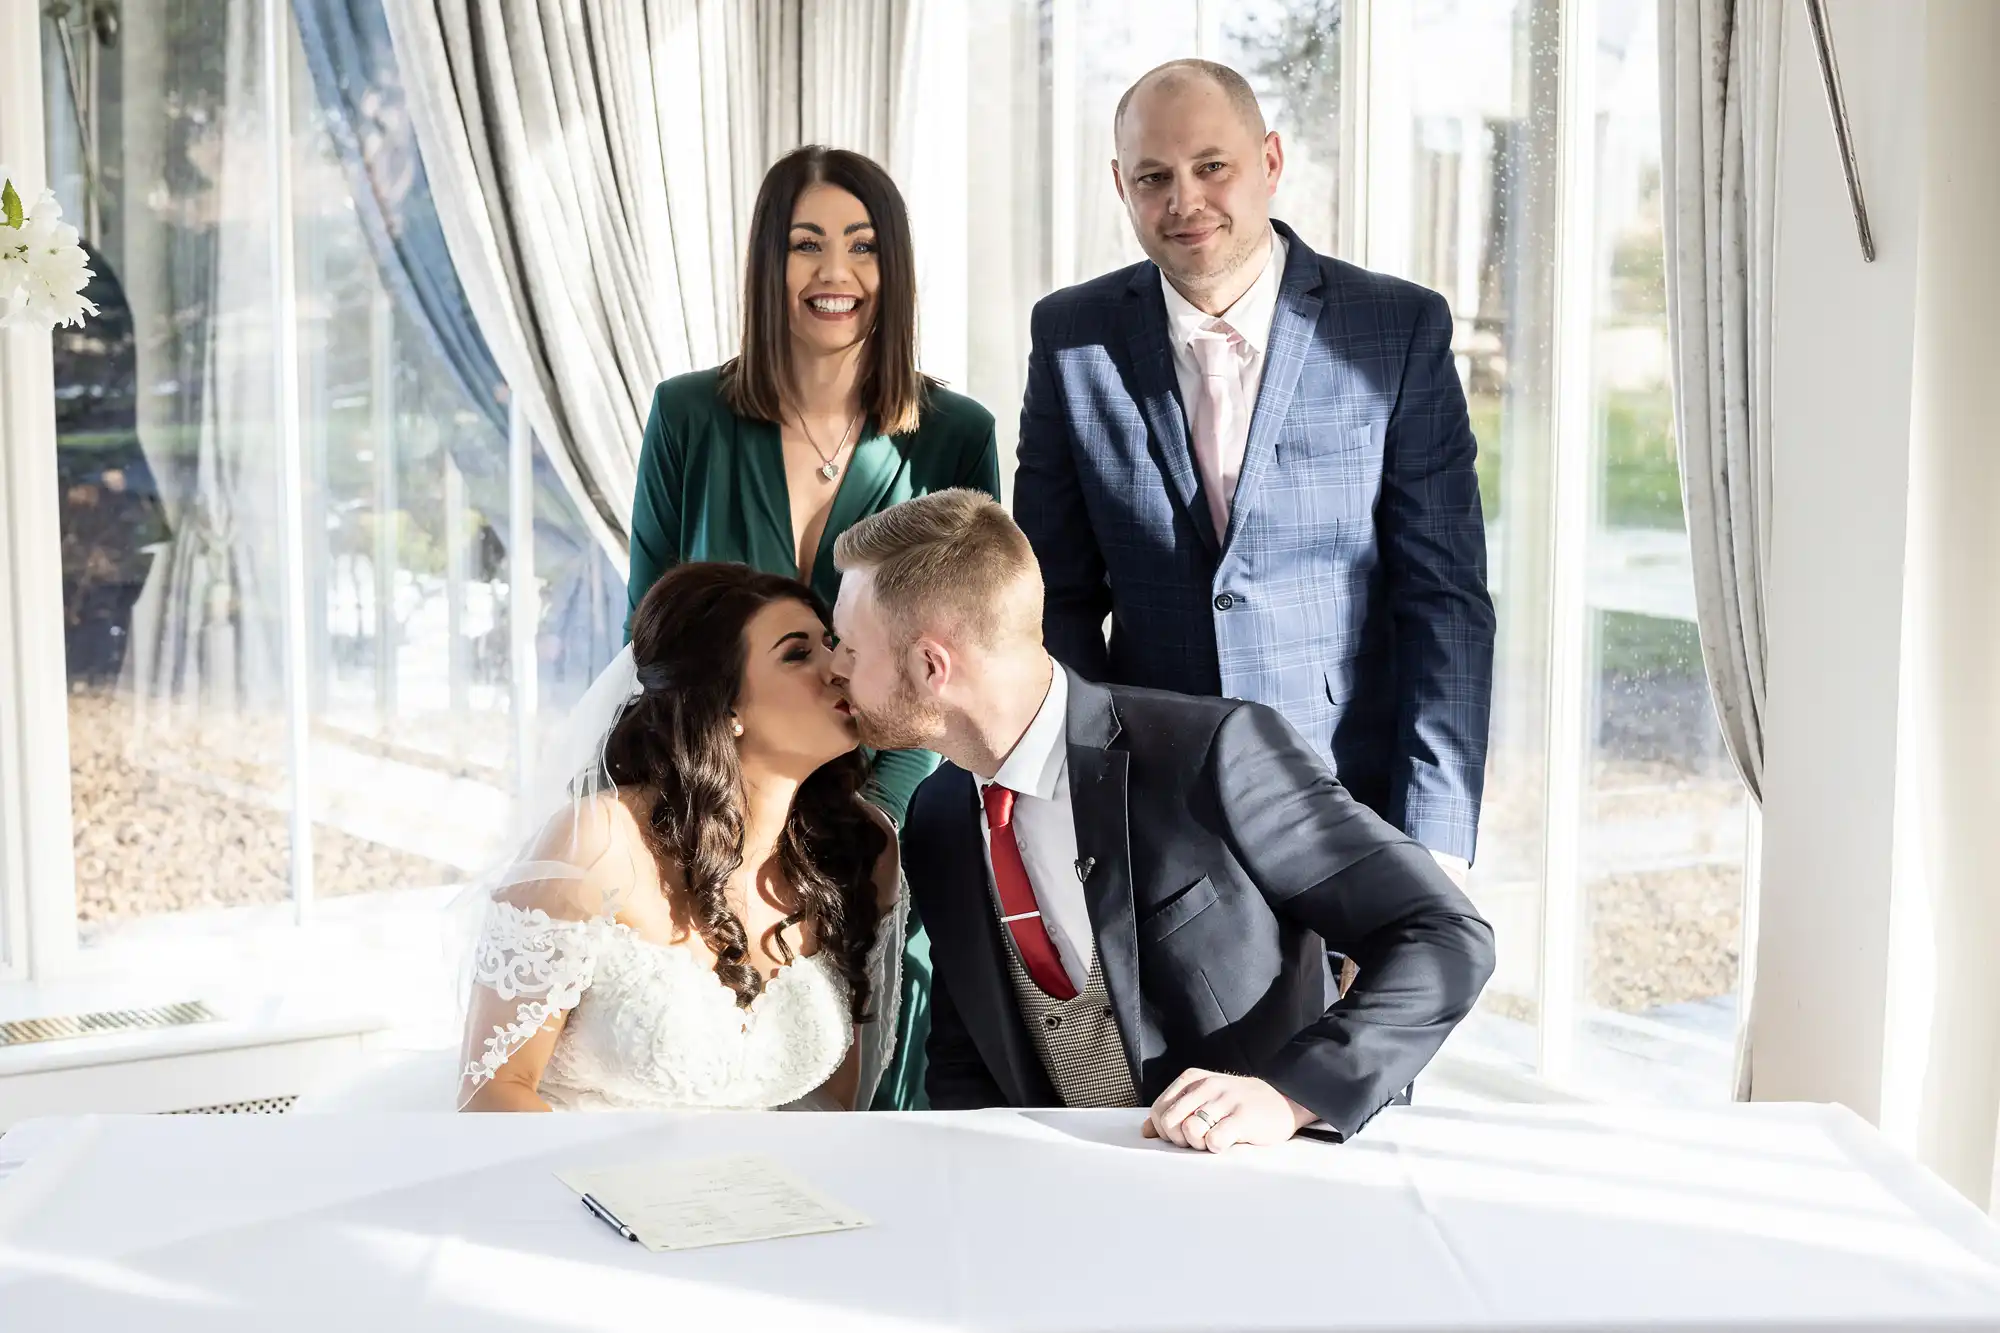 A newlywed couple kisses while seated at a table, with two individuals standing behind them, smiling, in a brightly lit room with large windows.